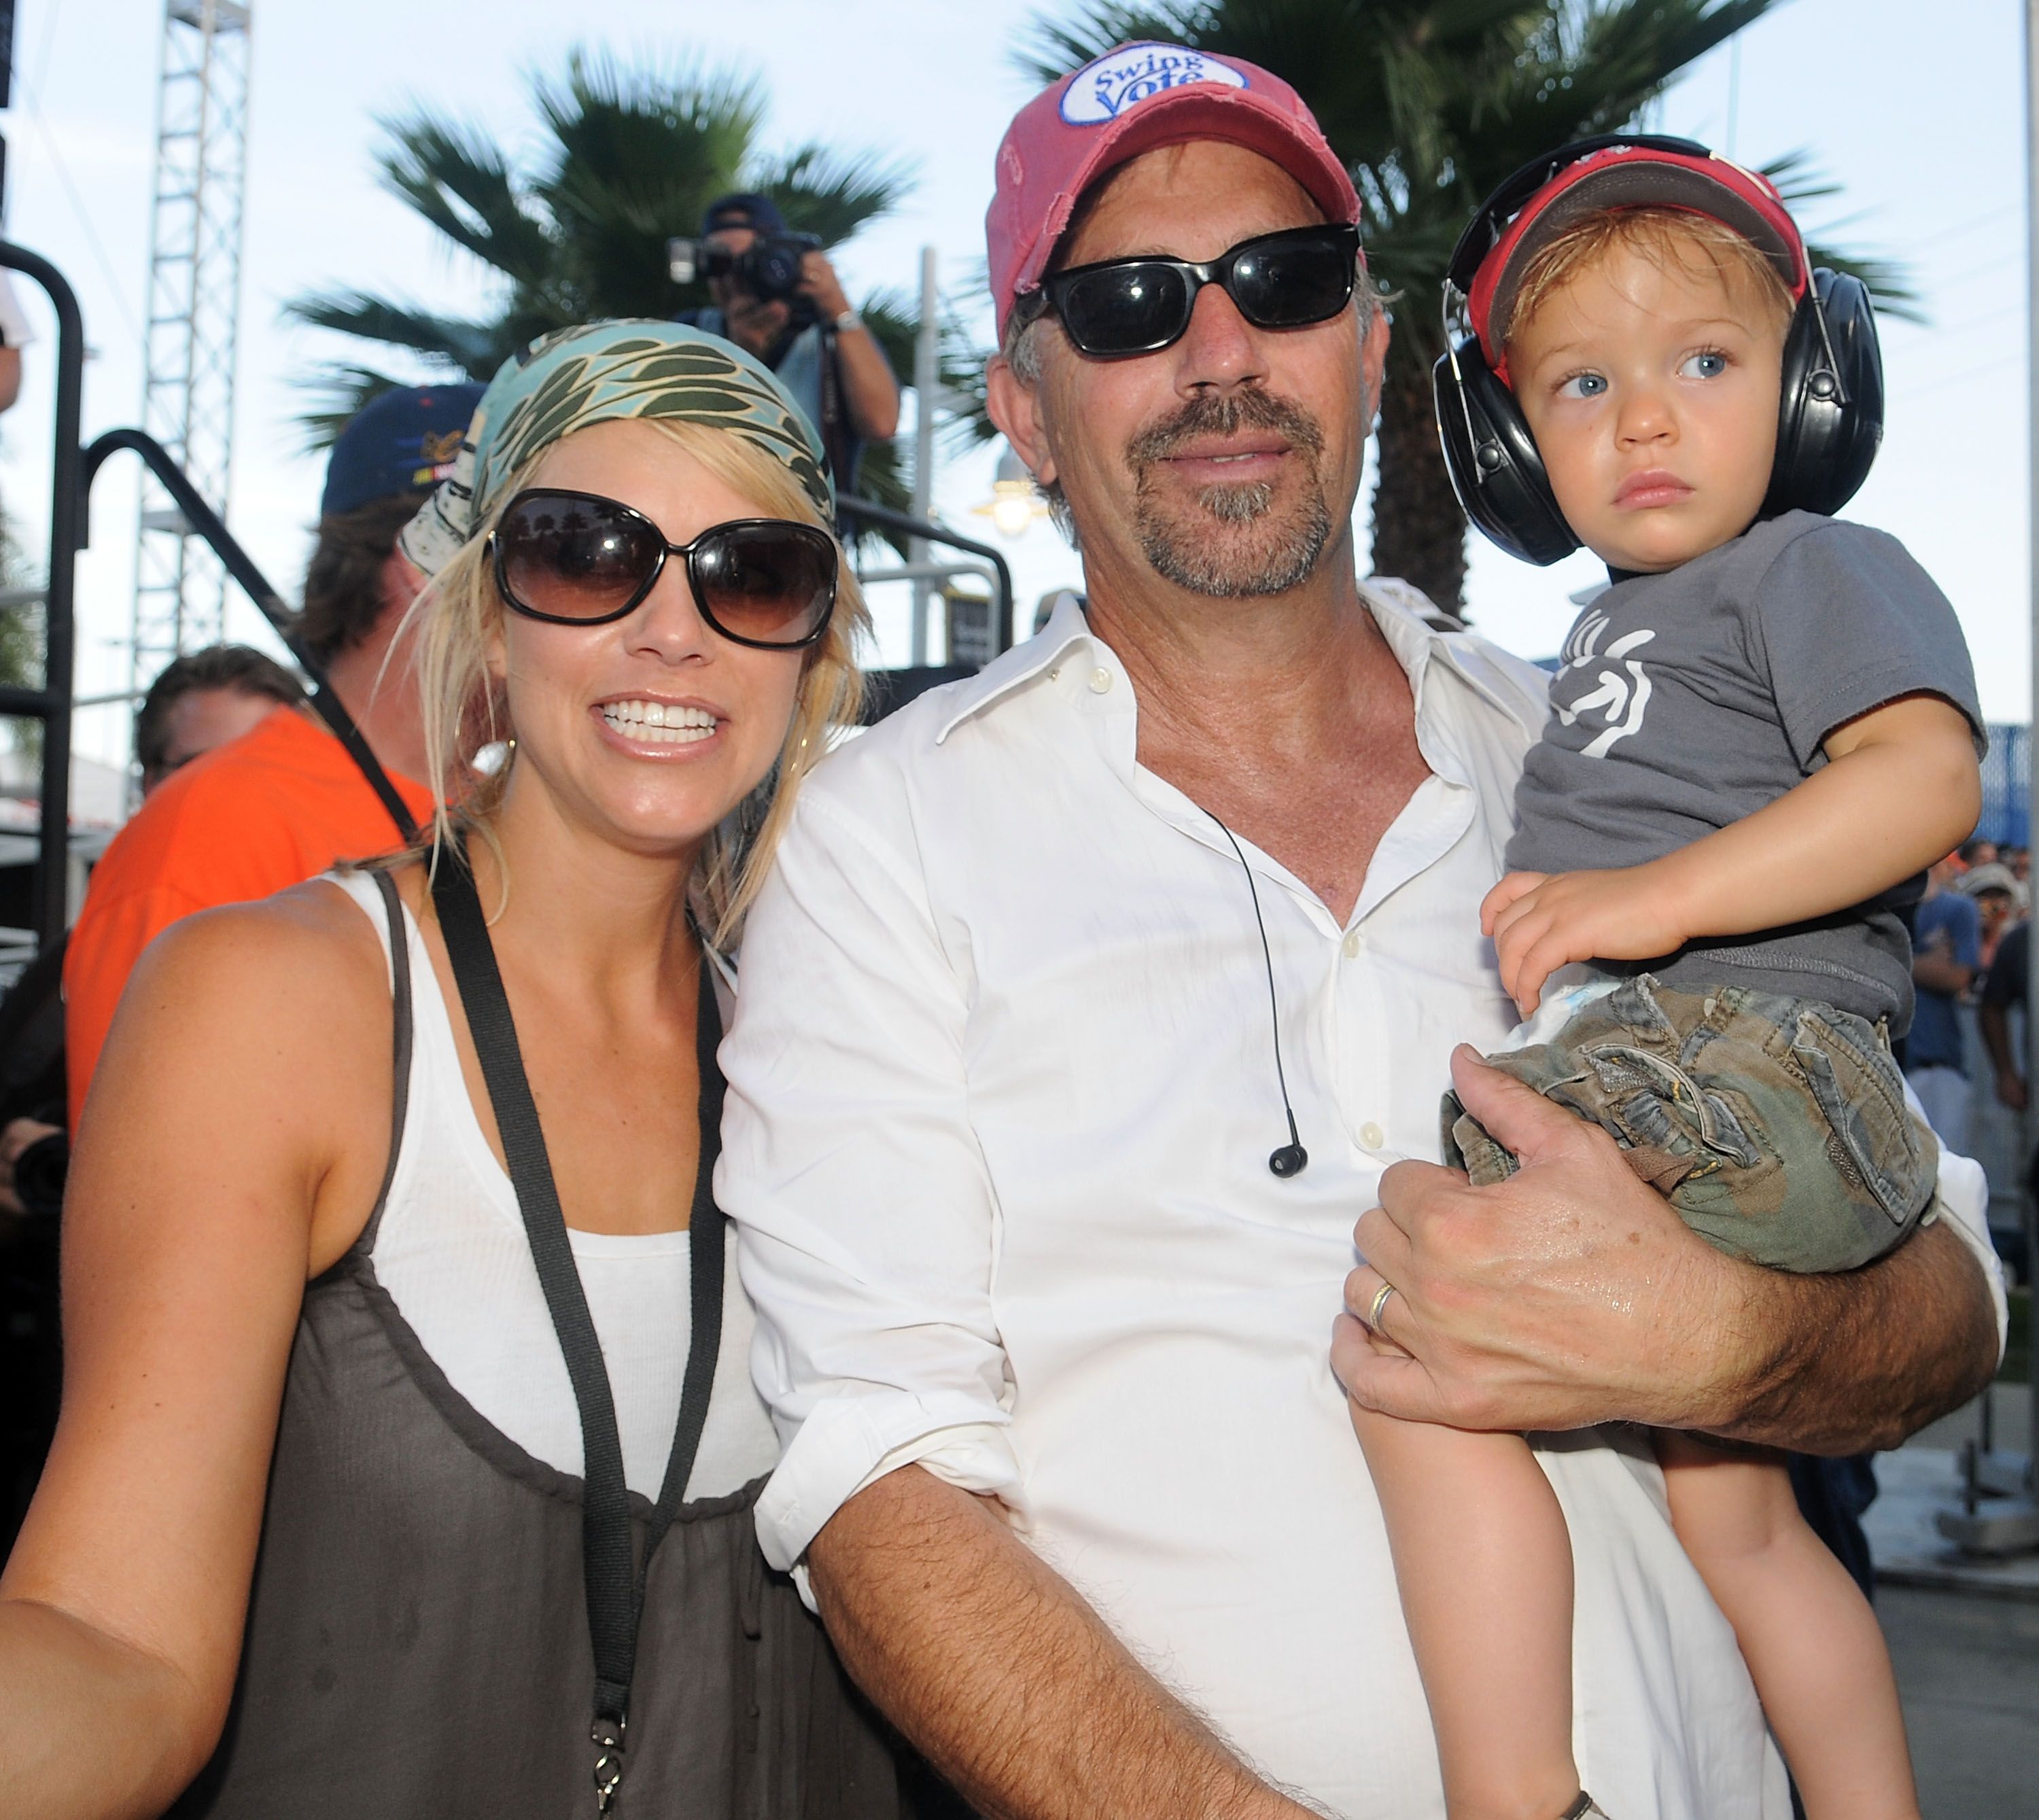 Kevin Costner (C) poses with his wife Christine Baumgartner (L) and son Cayden Costner during the Sprint Fan Zone before the NASCAR Sprint Cup Series Coke Zero 400 at Daytona International Speedway on July 5, 2008 in Daytona Beach, Florida | Source: Getty Images